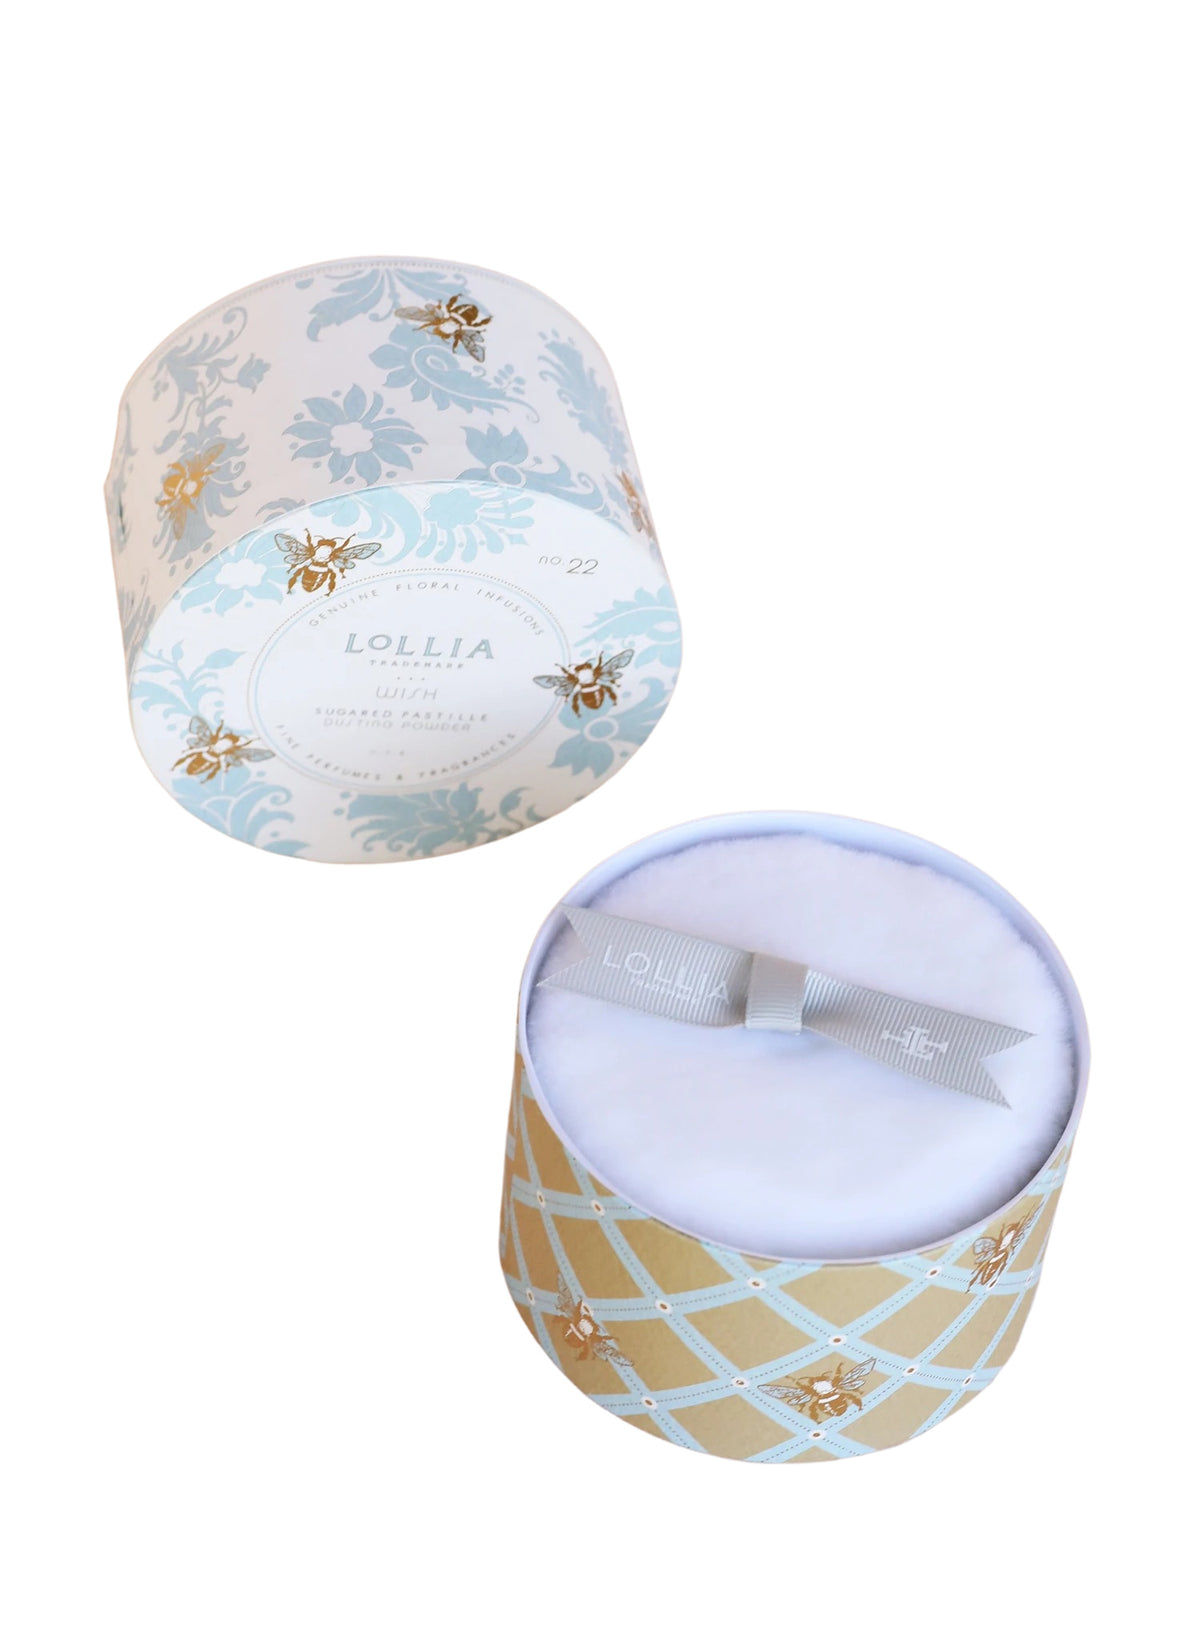 Two decorative boxes of Margot Elena brand products; the top image features a cylindrical box with a floral pattern, and the bottom image shows the inside of another box, revealing Lollia Wish Dusting Powder.